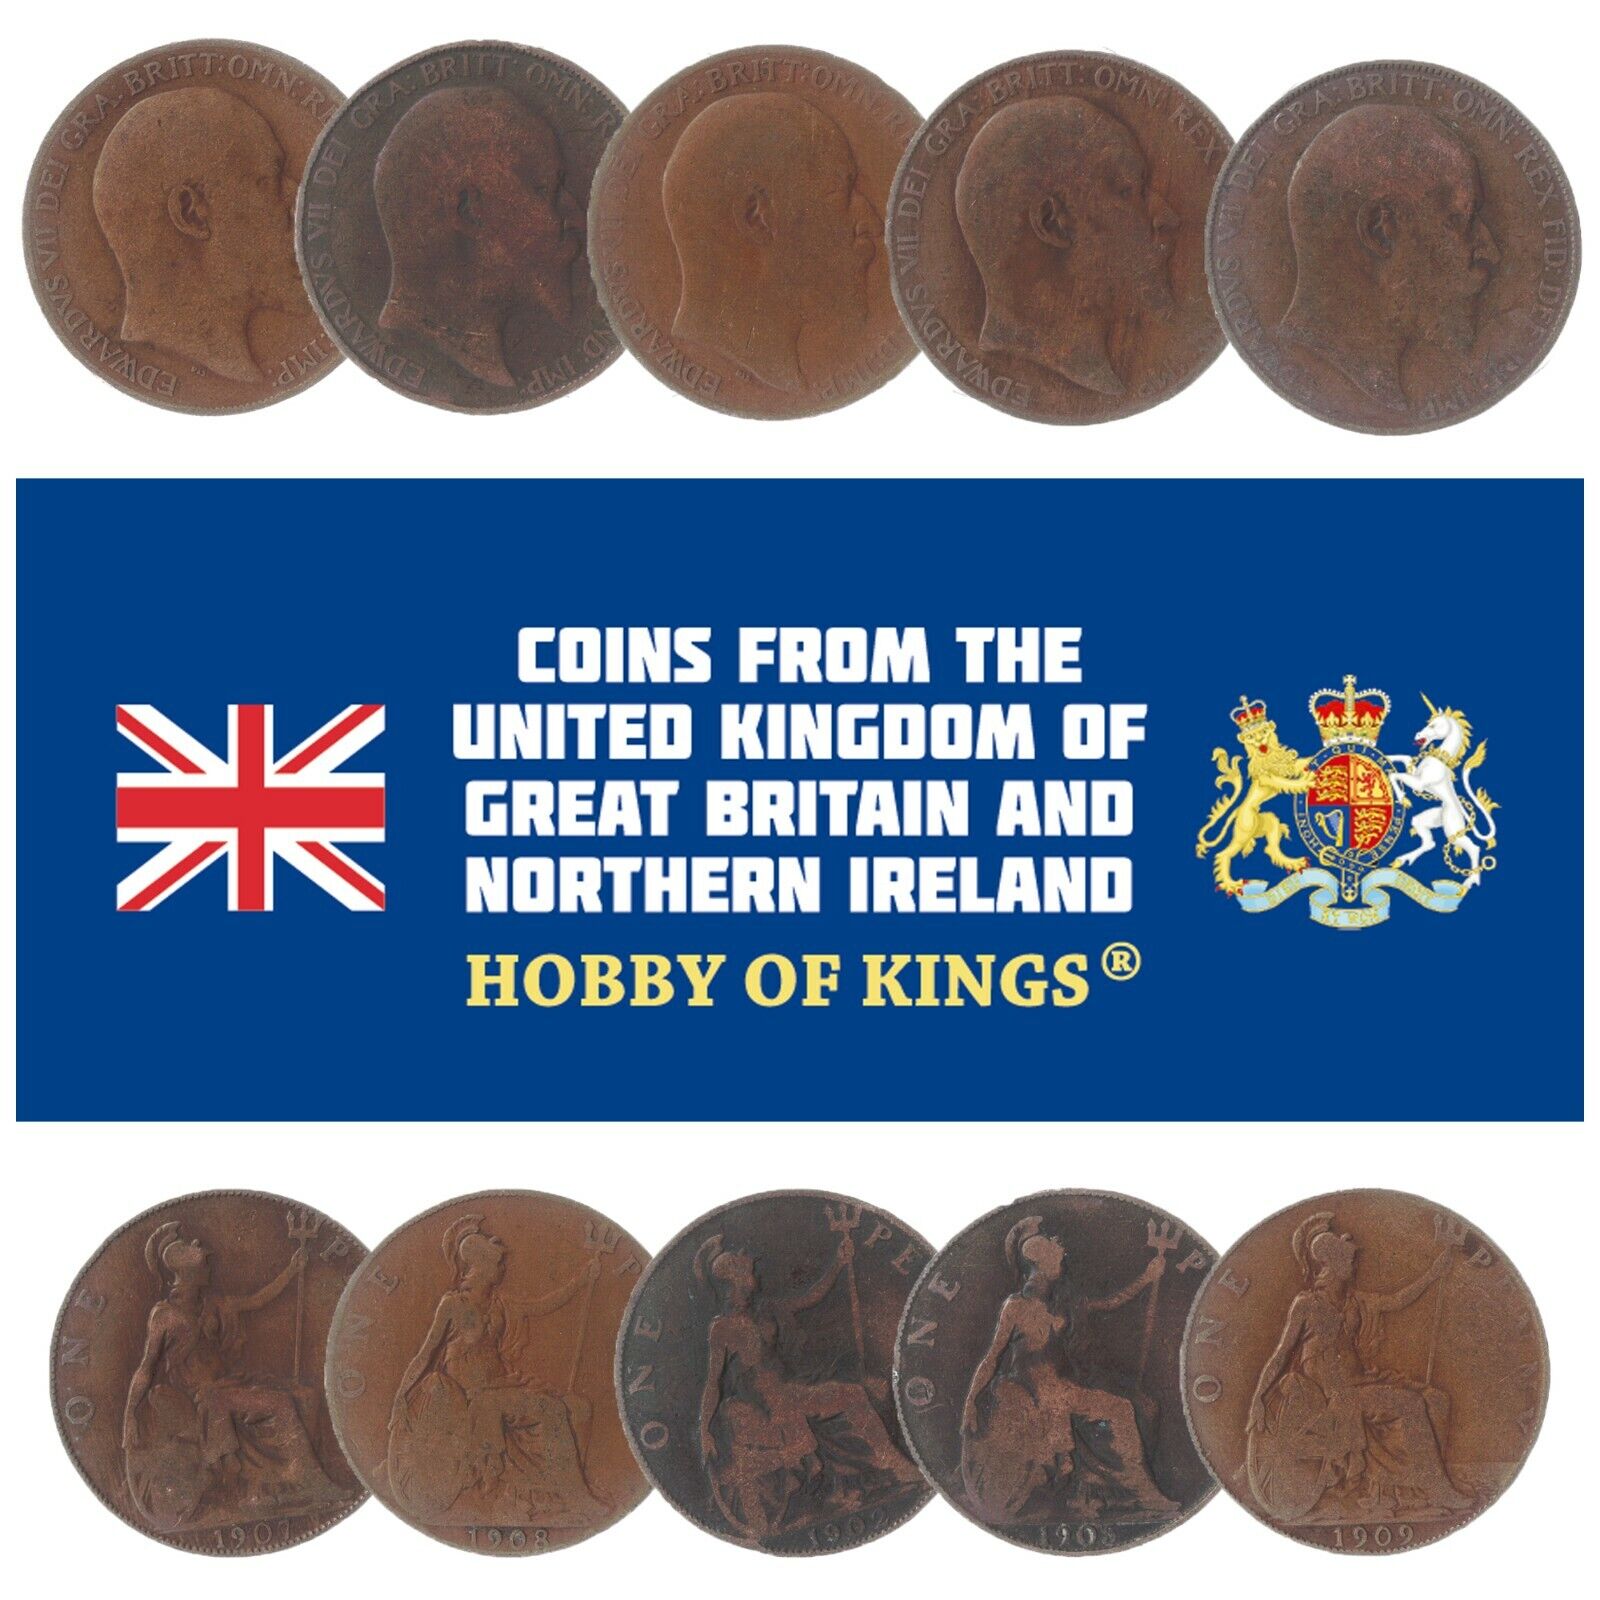 LOT OF 10 GREAT BRITAIN UNITED KINGDOM 1 PENNY COINS, KING EDWARD VII 1902-1910